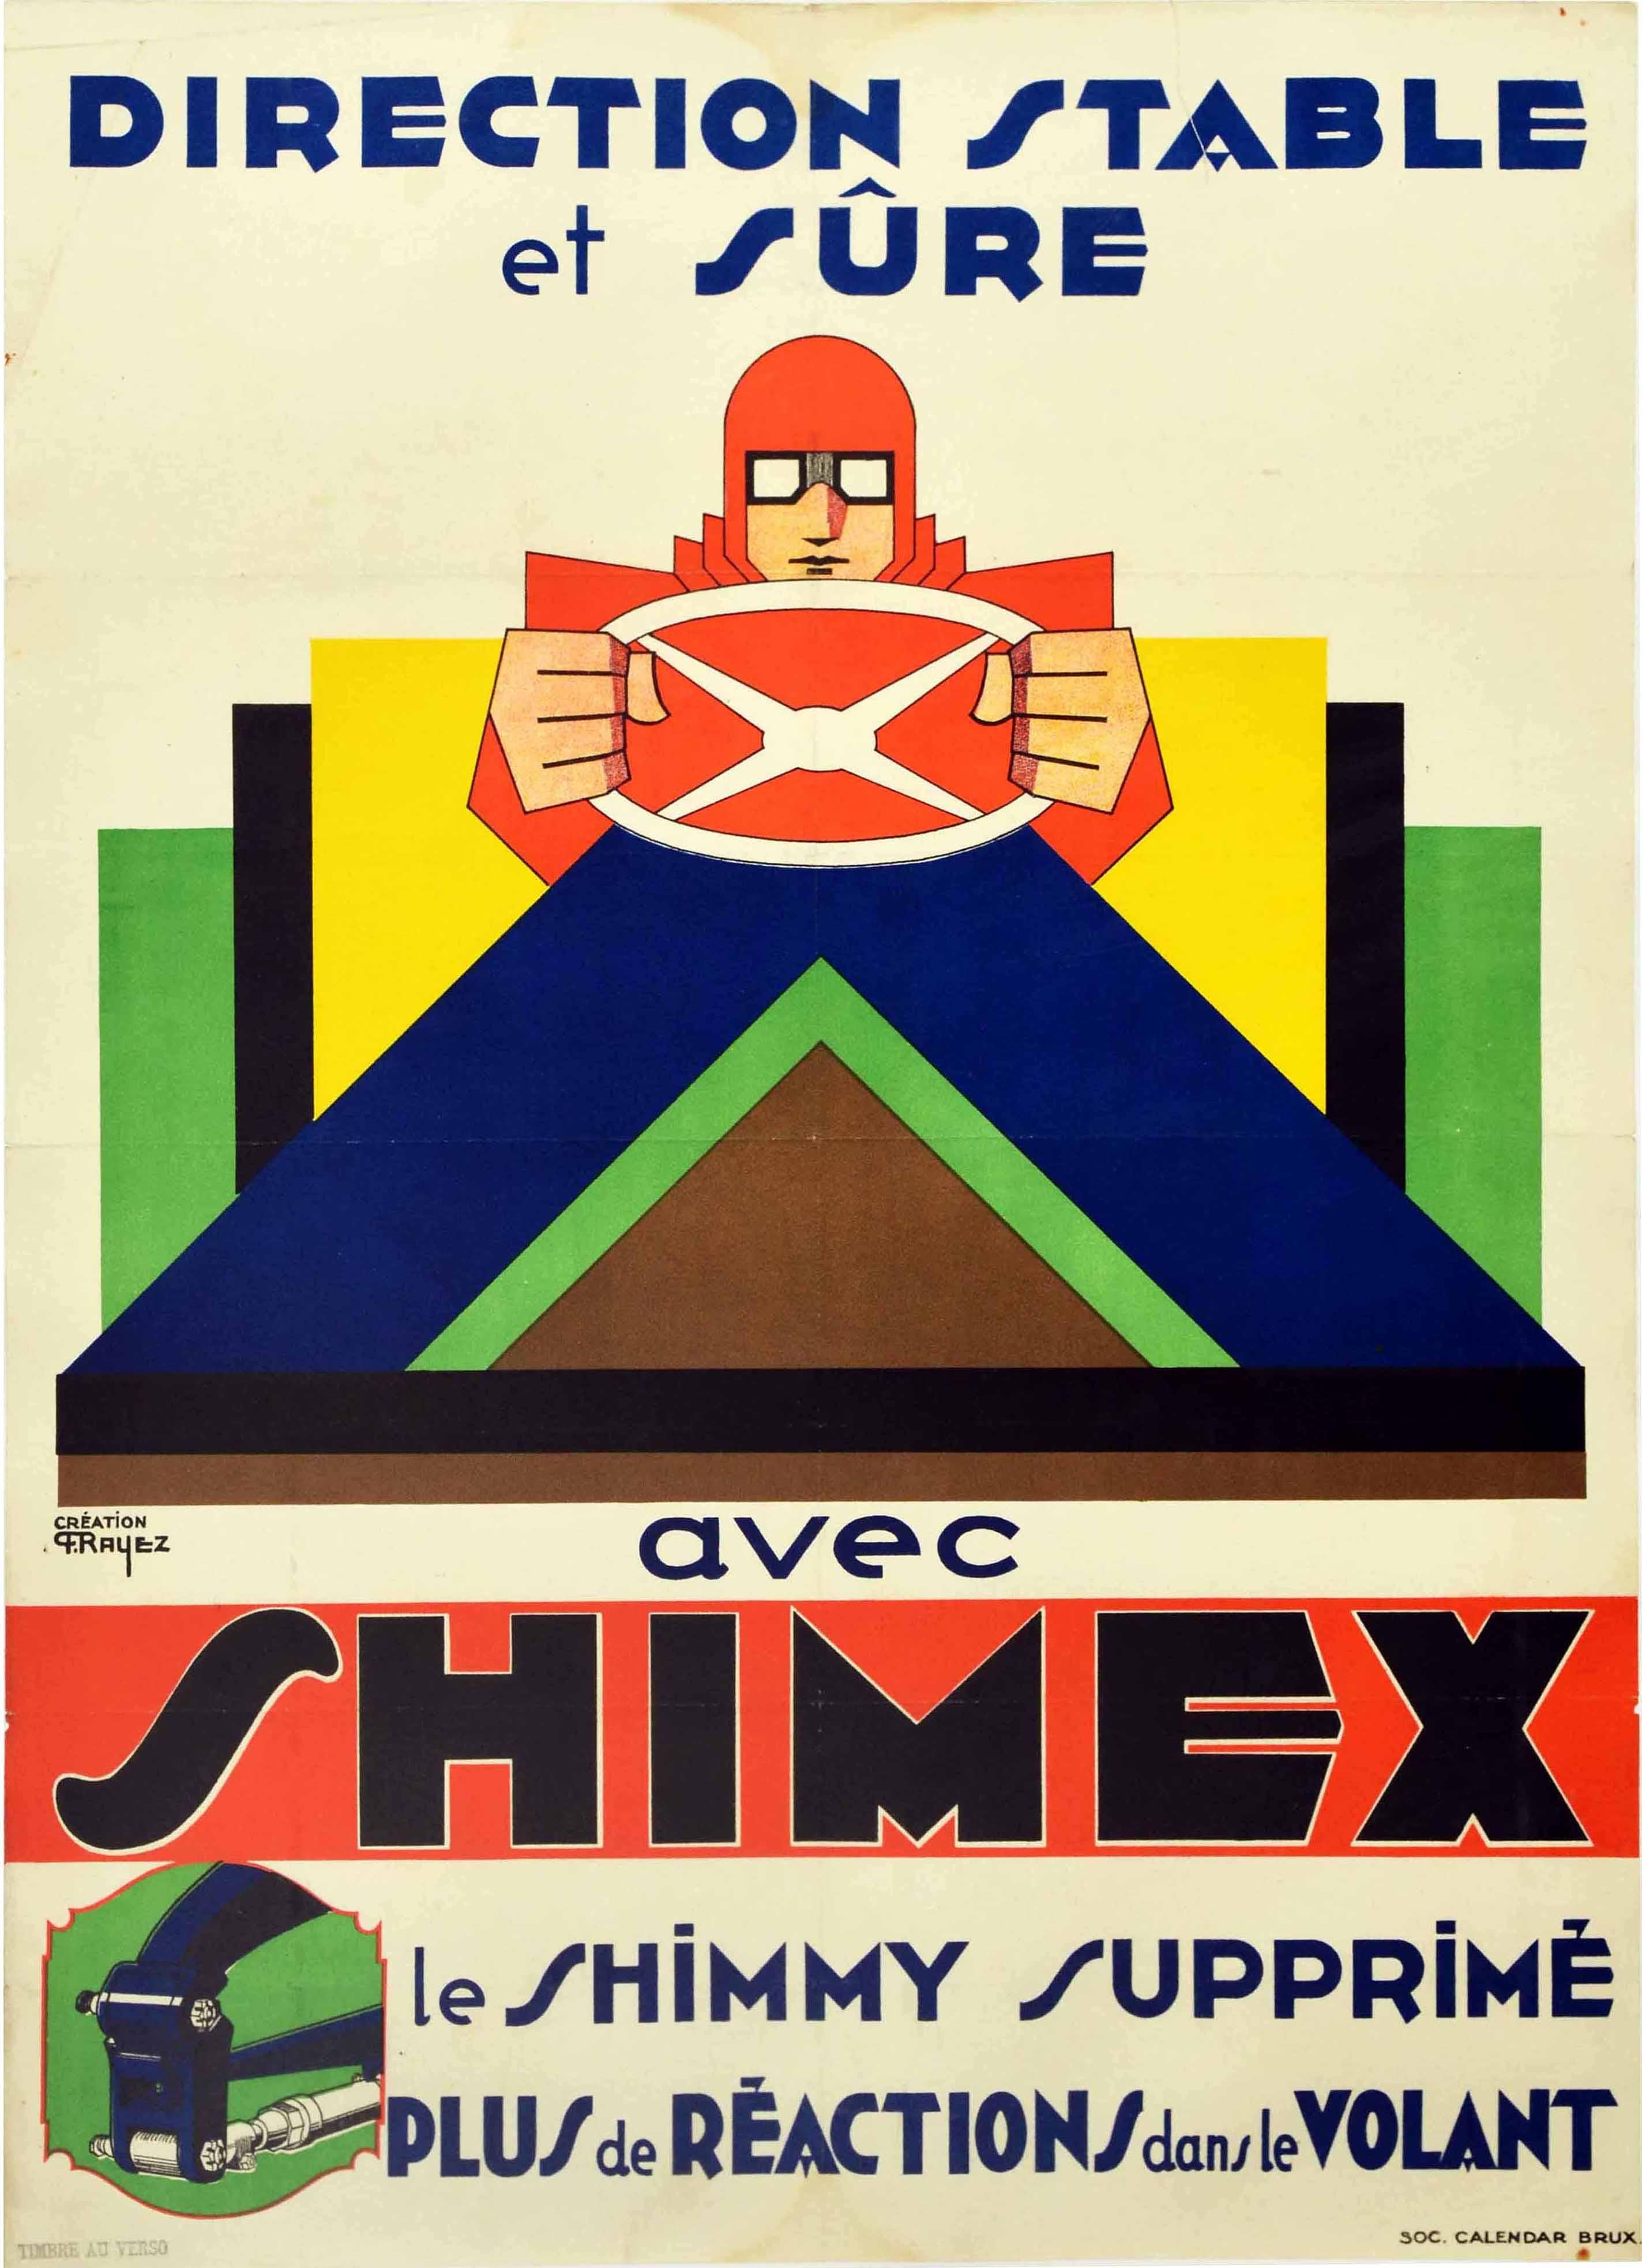 Original vintage advertising poster for steering wheel shimmy by Shimex - Direction Stable et Sure avec Shimex. Le shimmy supprime plus de reactions dans le volant / Stable and Sure Steering with Shimex. The shimmy removes more reactions in the